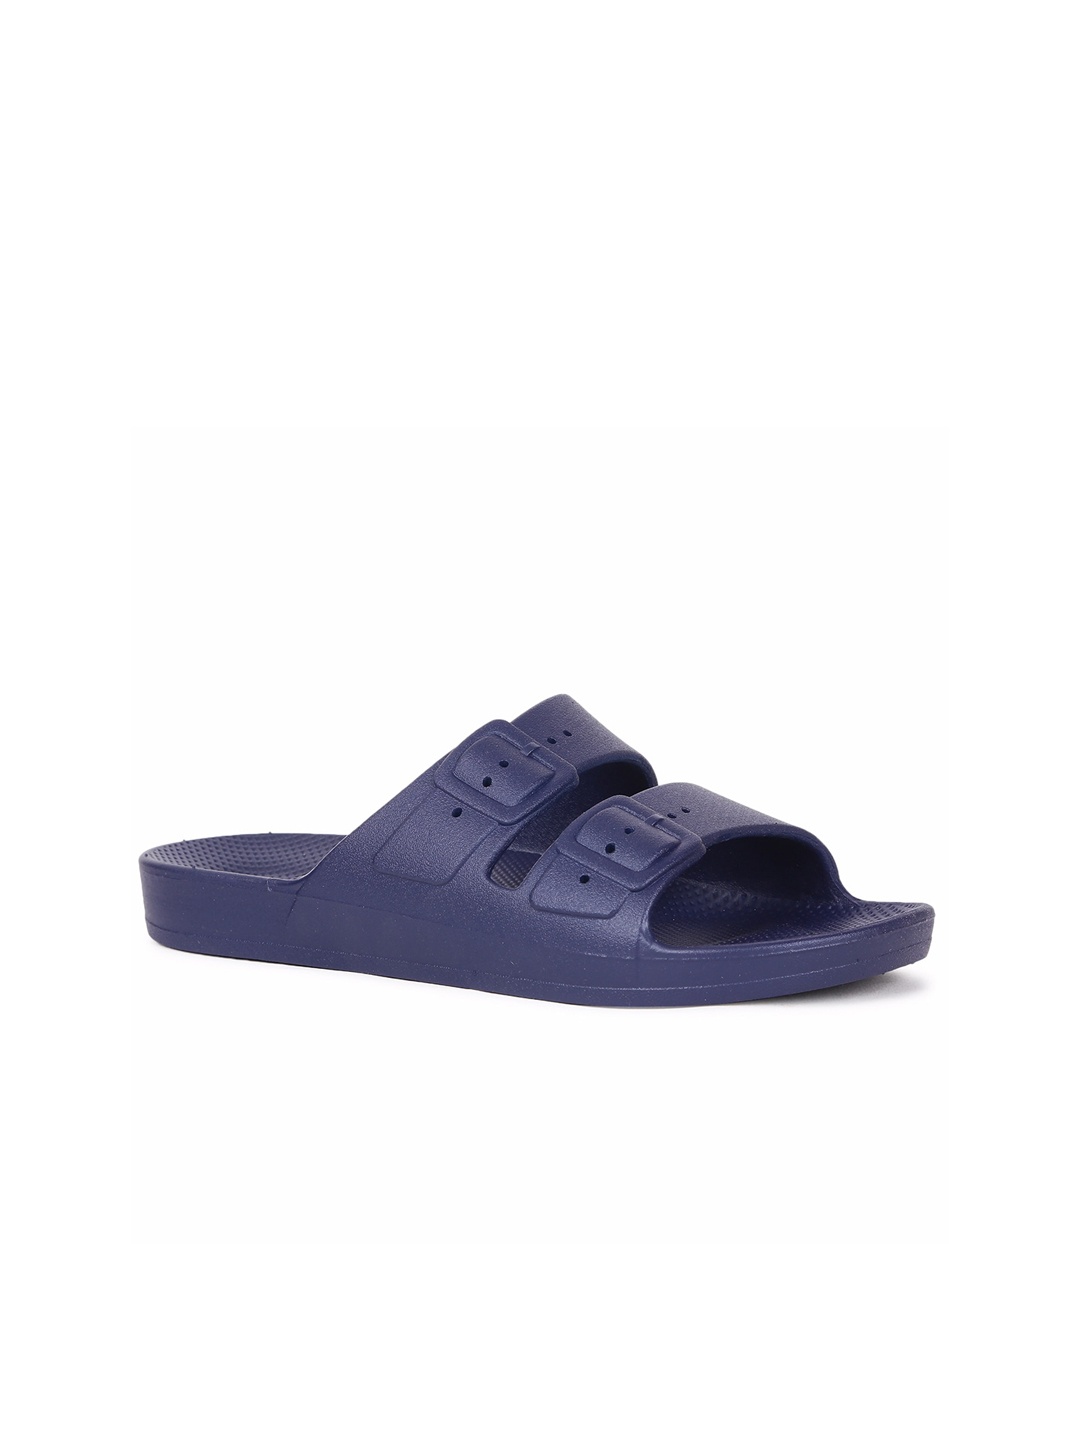 

Sandak by Bata Open Two Strap Sliders With Buckles, Navy blue